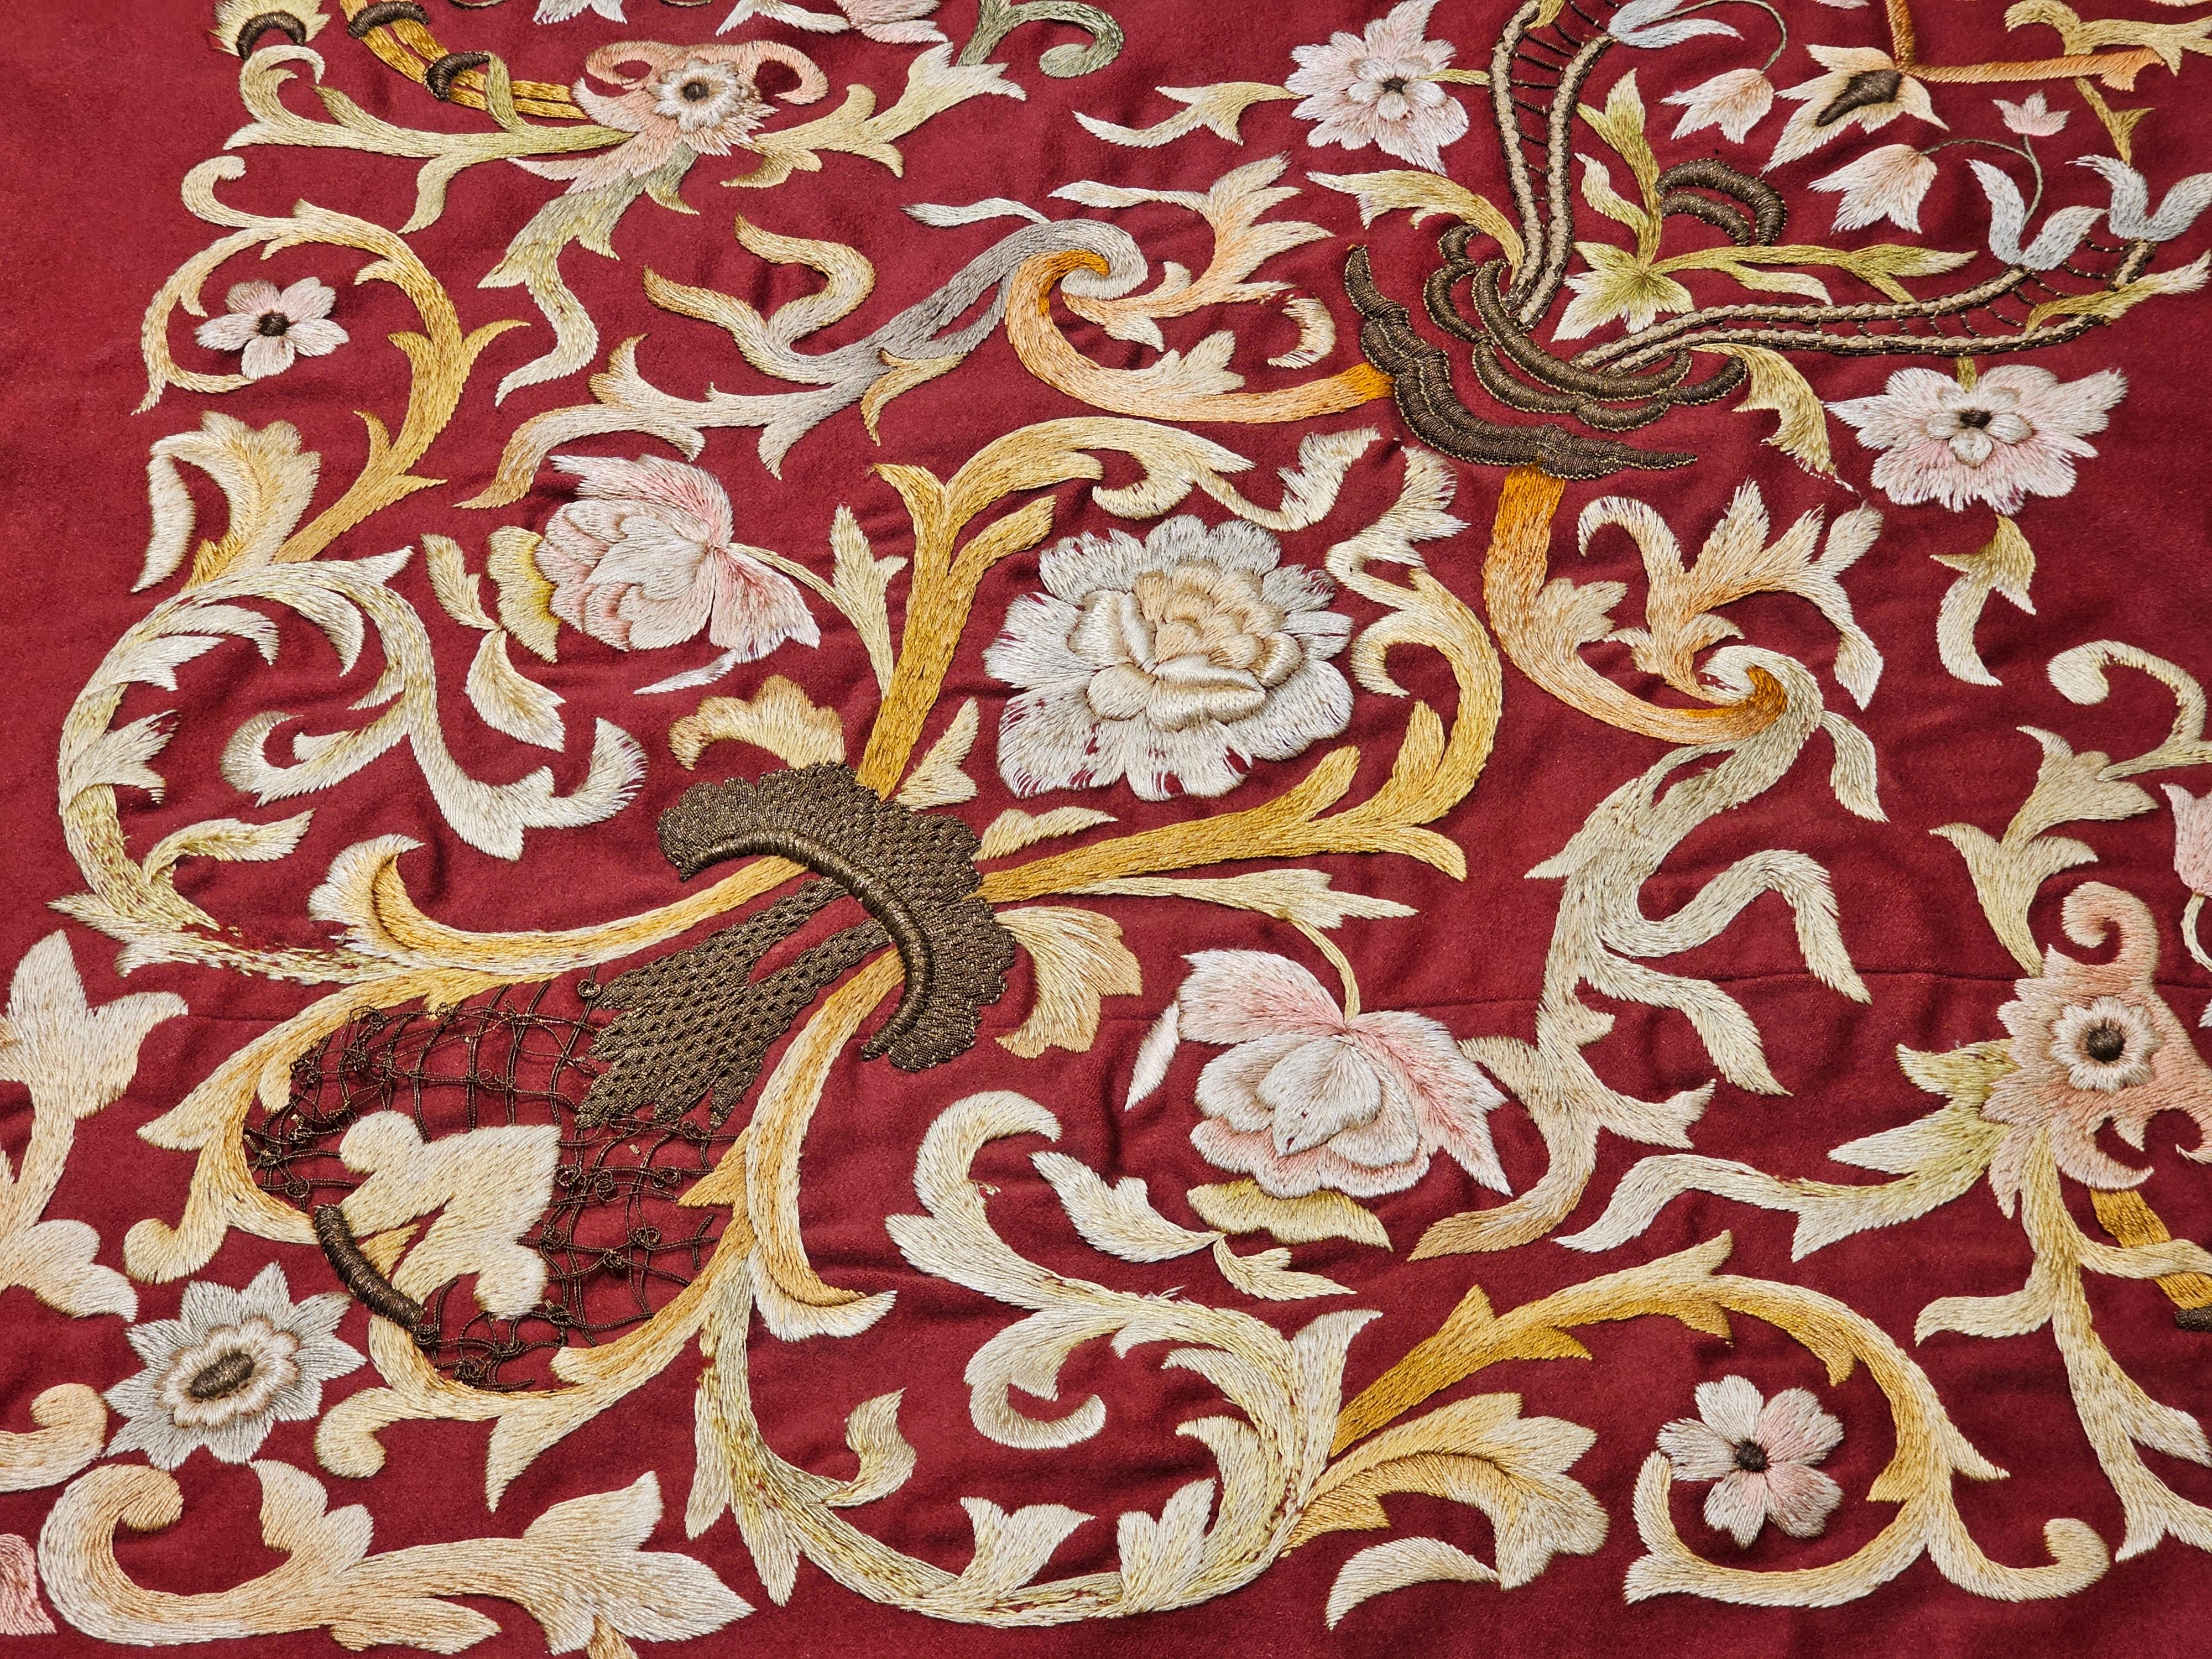 Turkish 19th Century Ottoman Hand Embroidered Silk and Gilt Threads Tapestry Textile For Sale